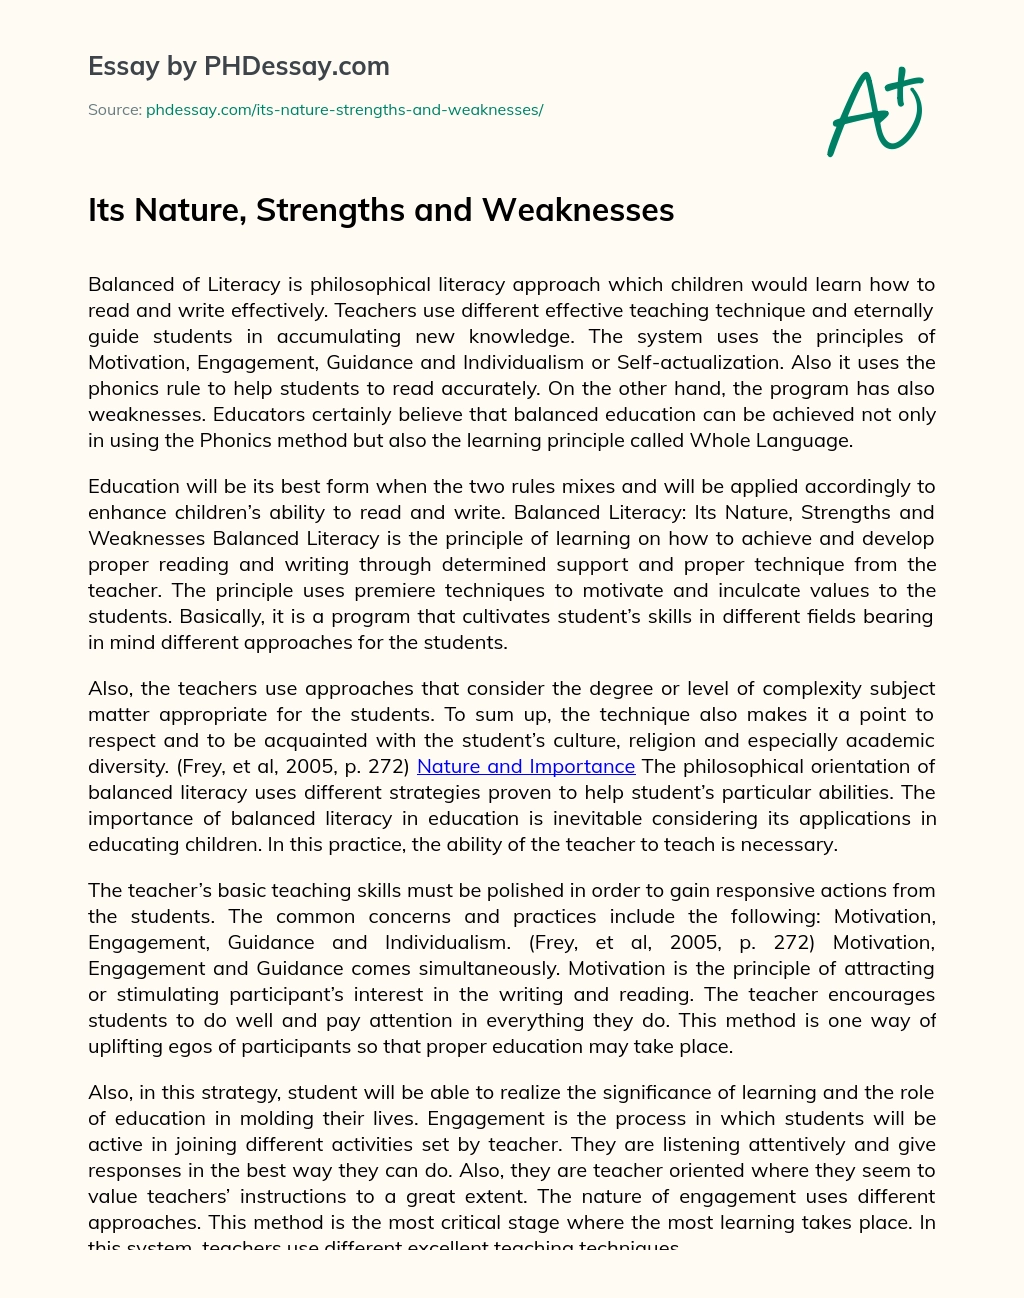 Its Nature, Strengths and Weaknesses essay